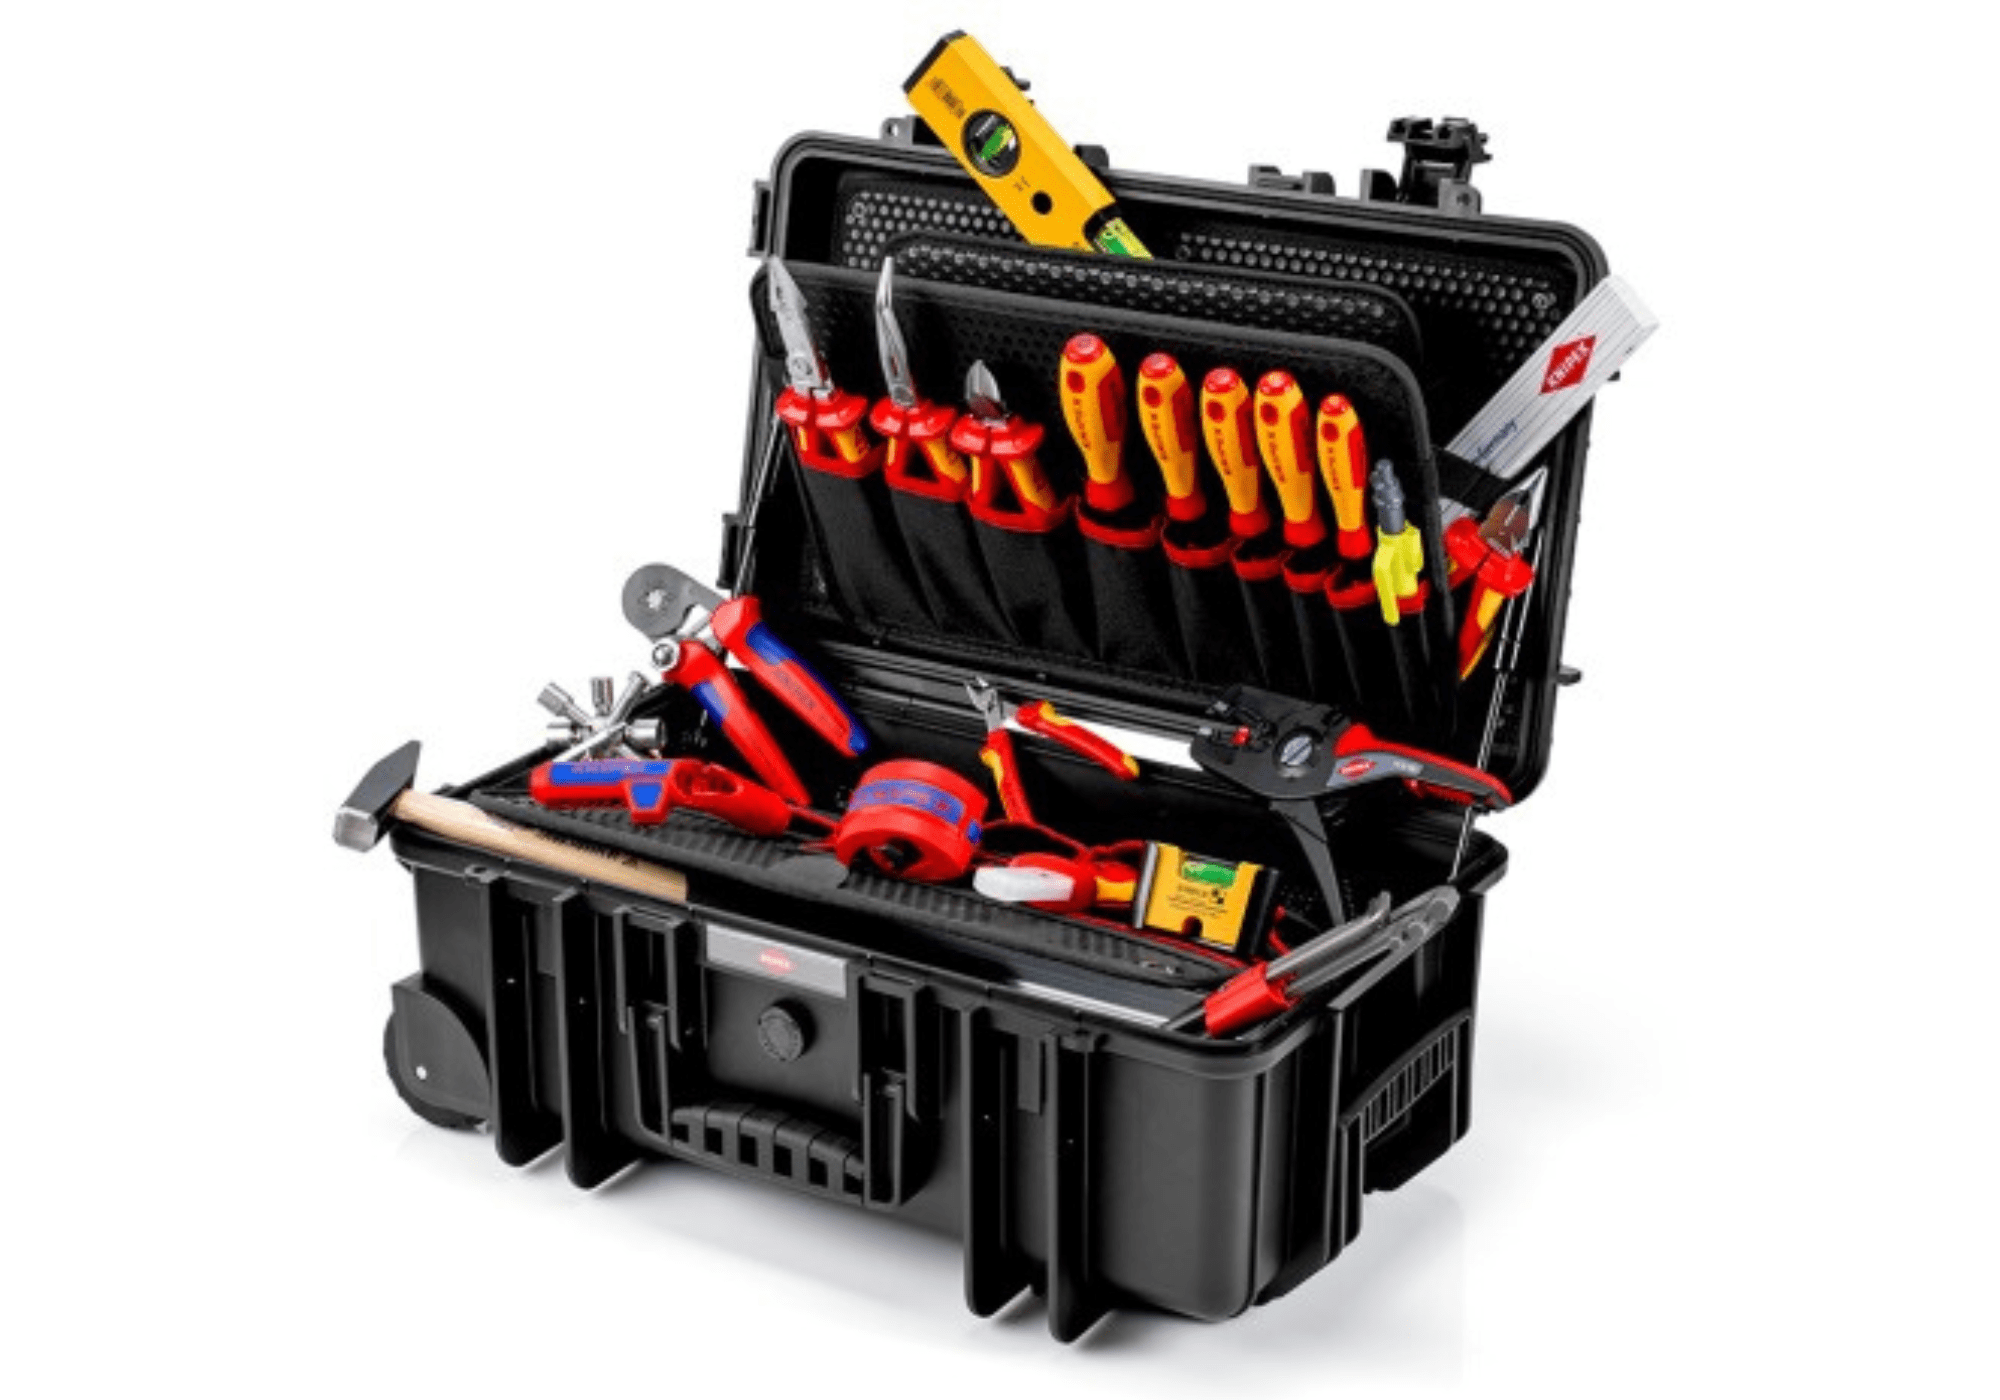 Electricians manual tool set in a toolbox